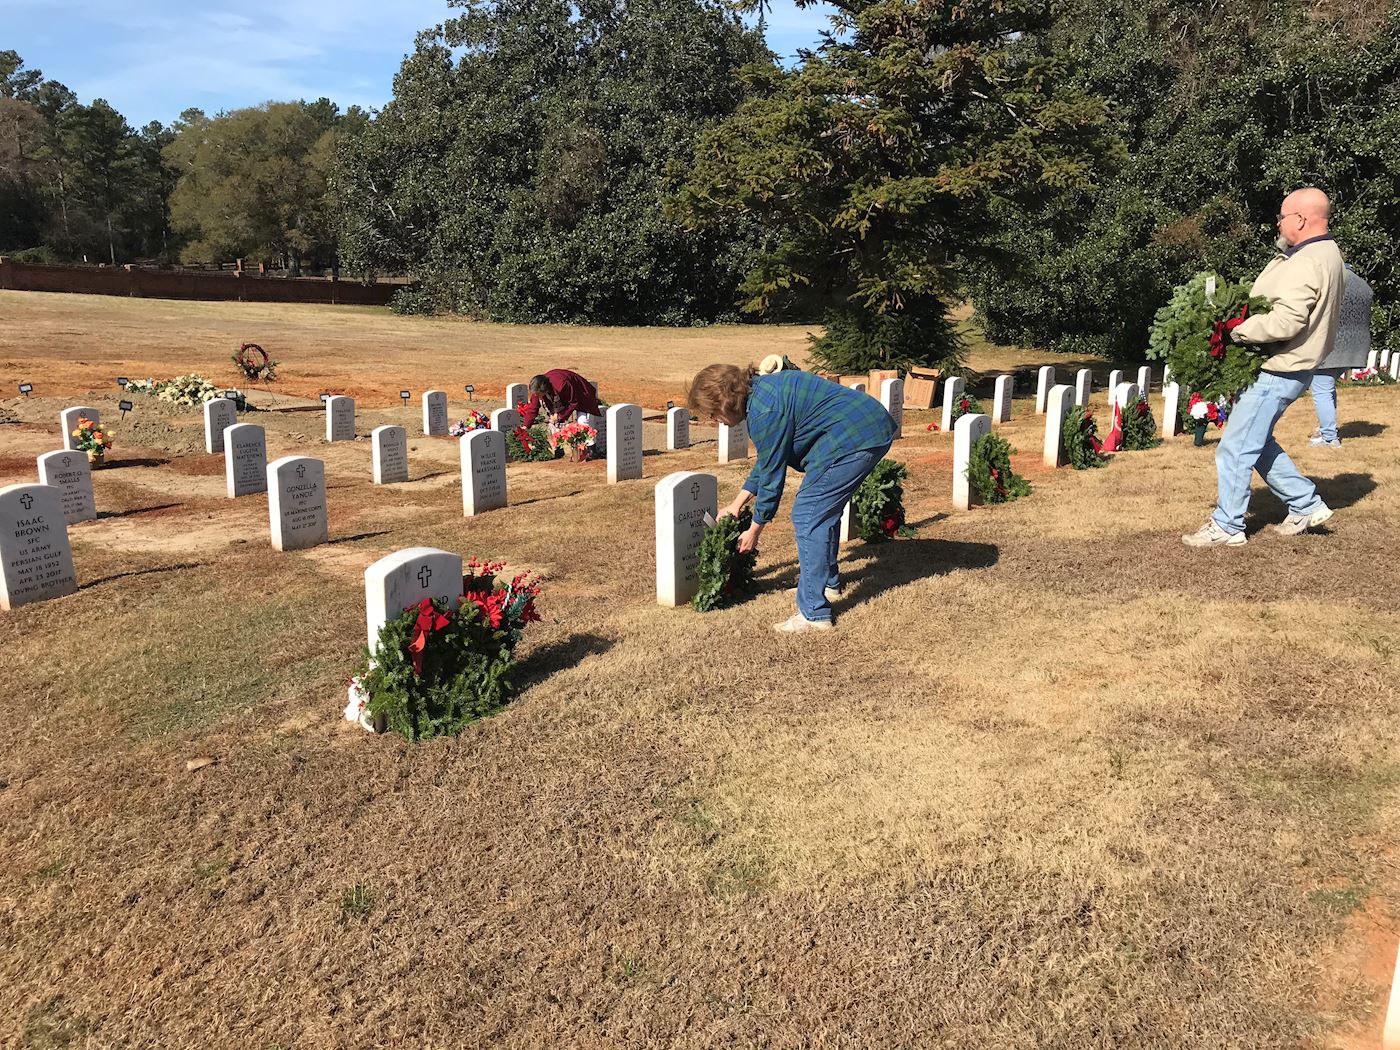 Many volunteers came out to lay wreaths